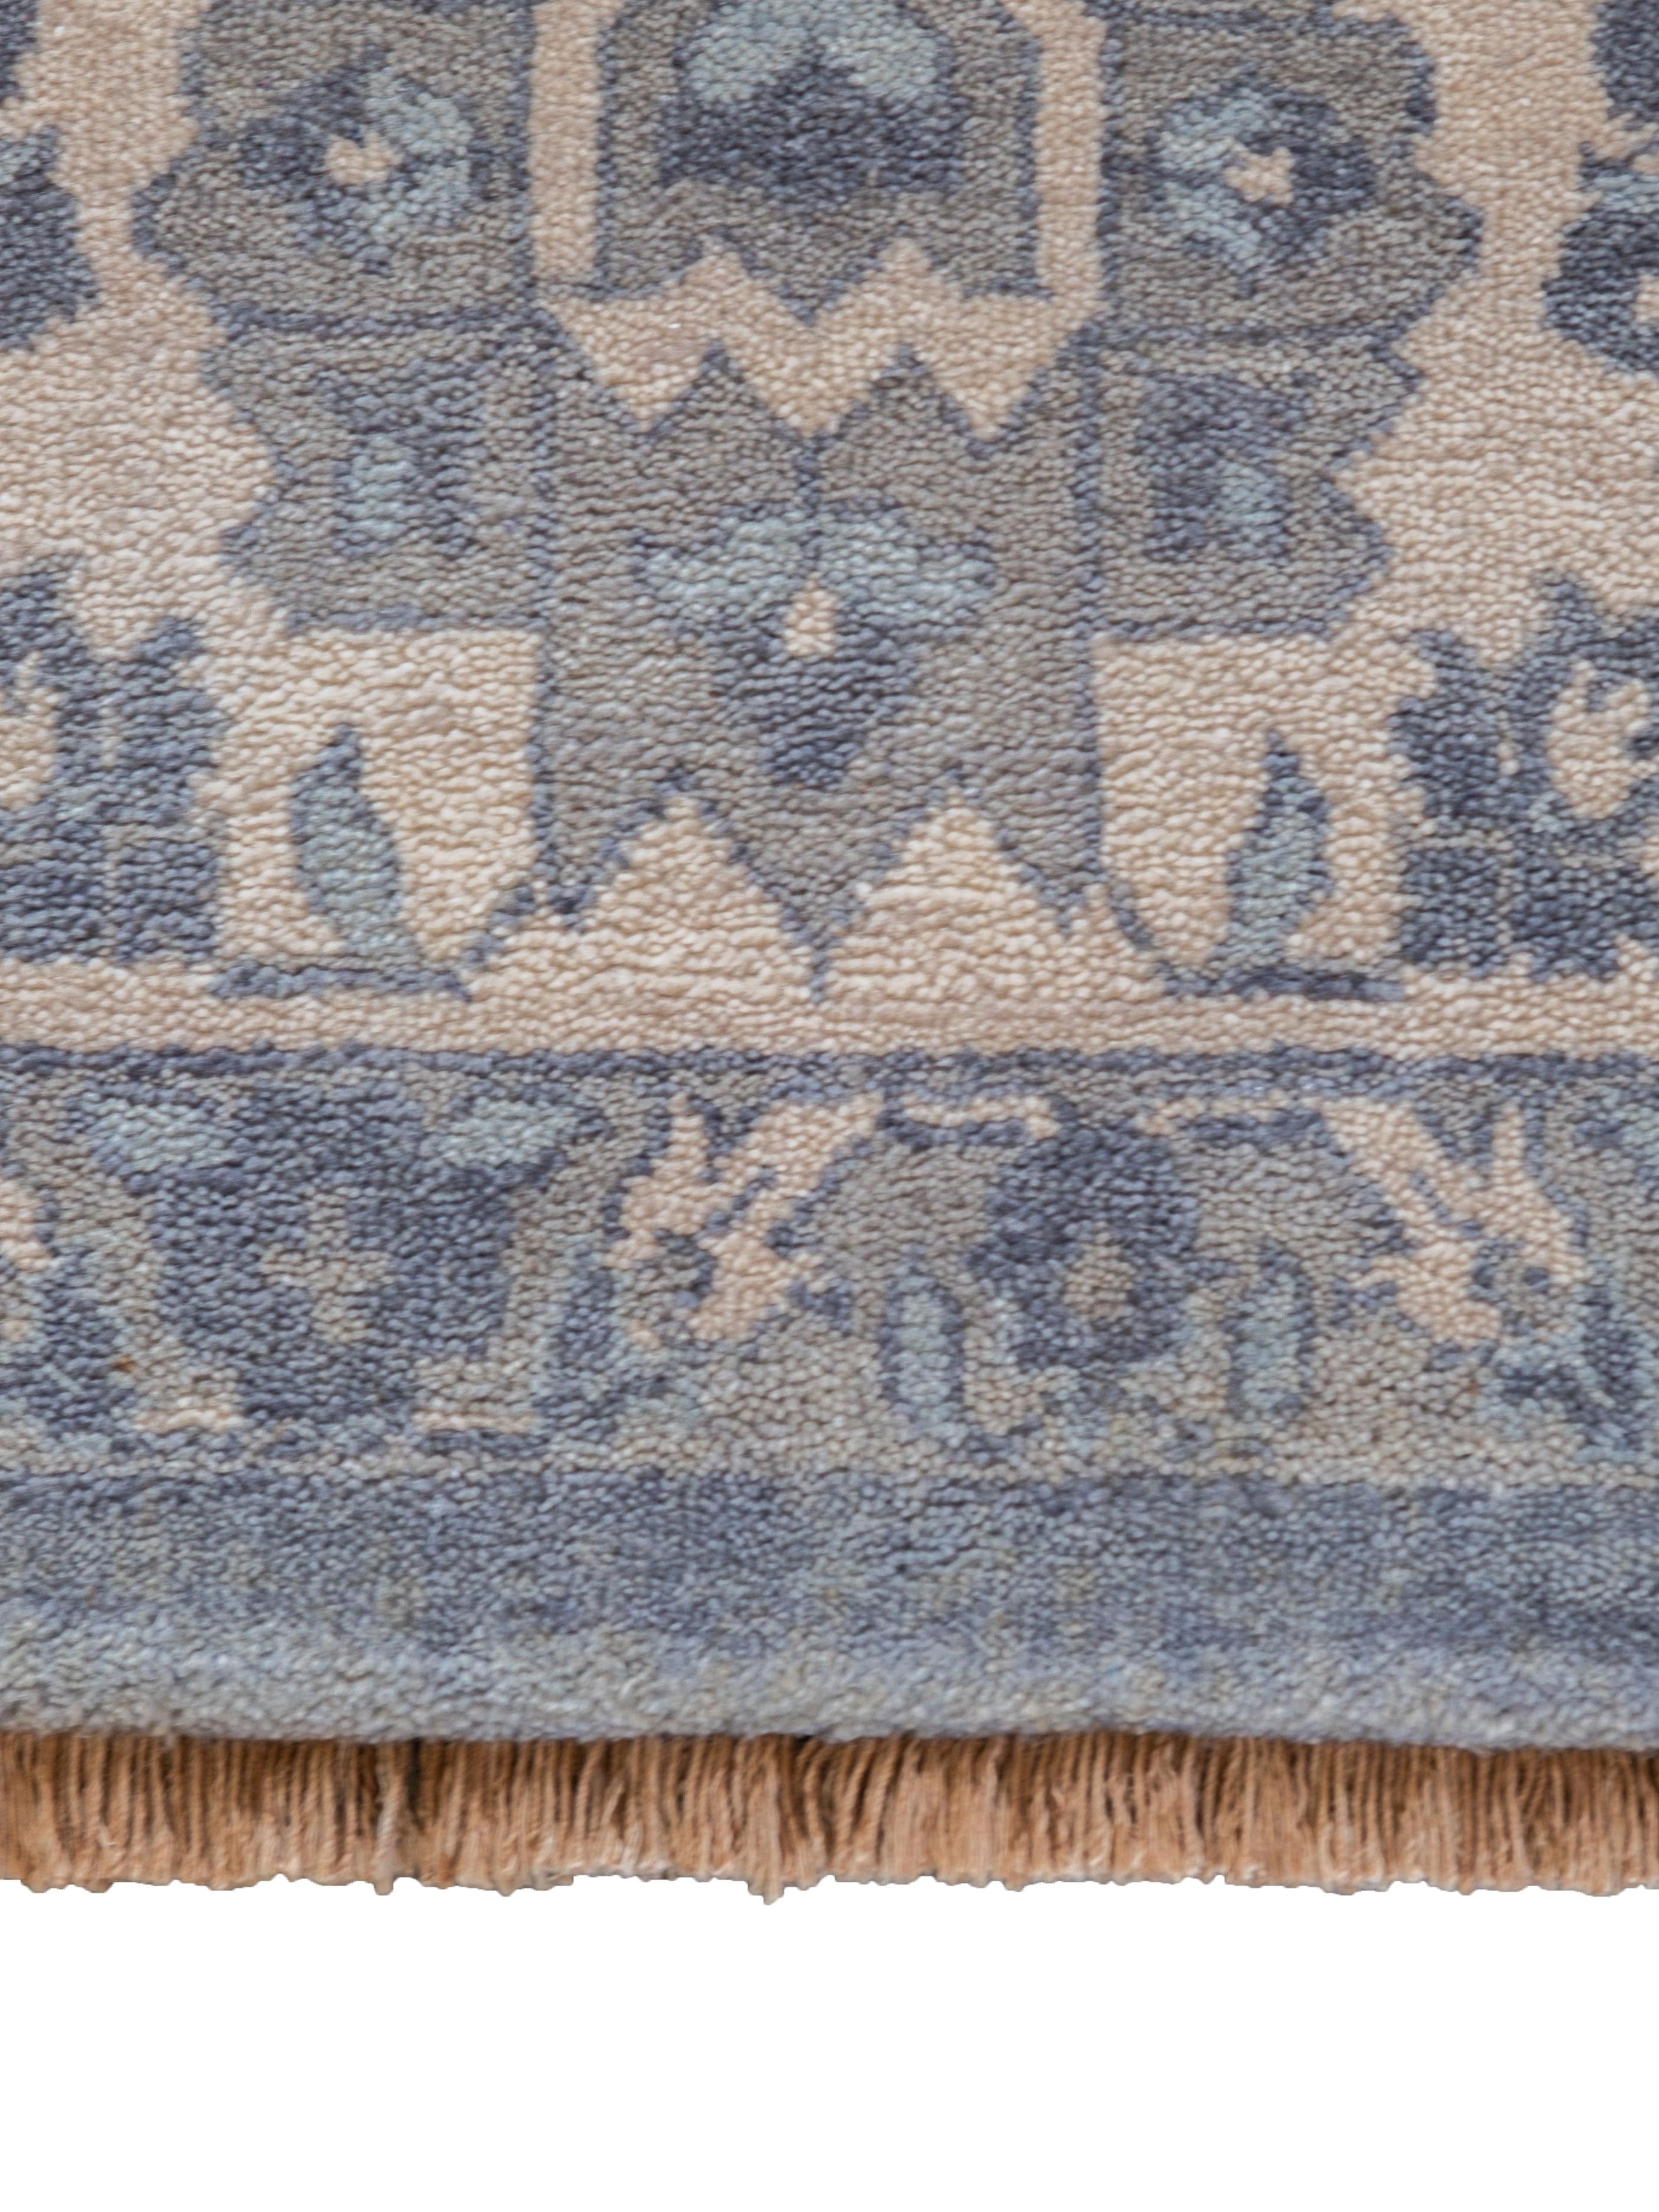 Contemporary Formal and Transitional Grey Hand-Knotted Wool Persian Carpet, 9' x 12' For Sale